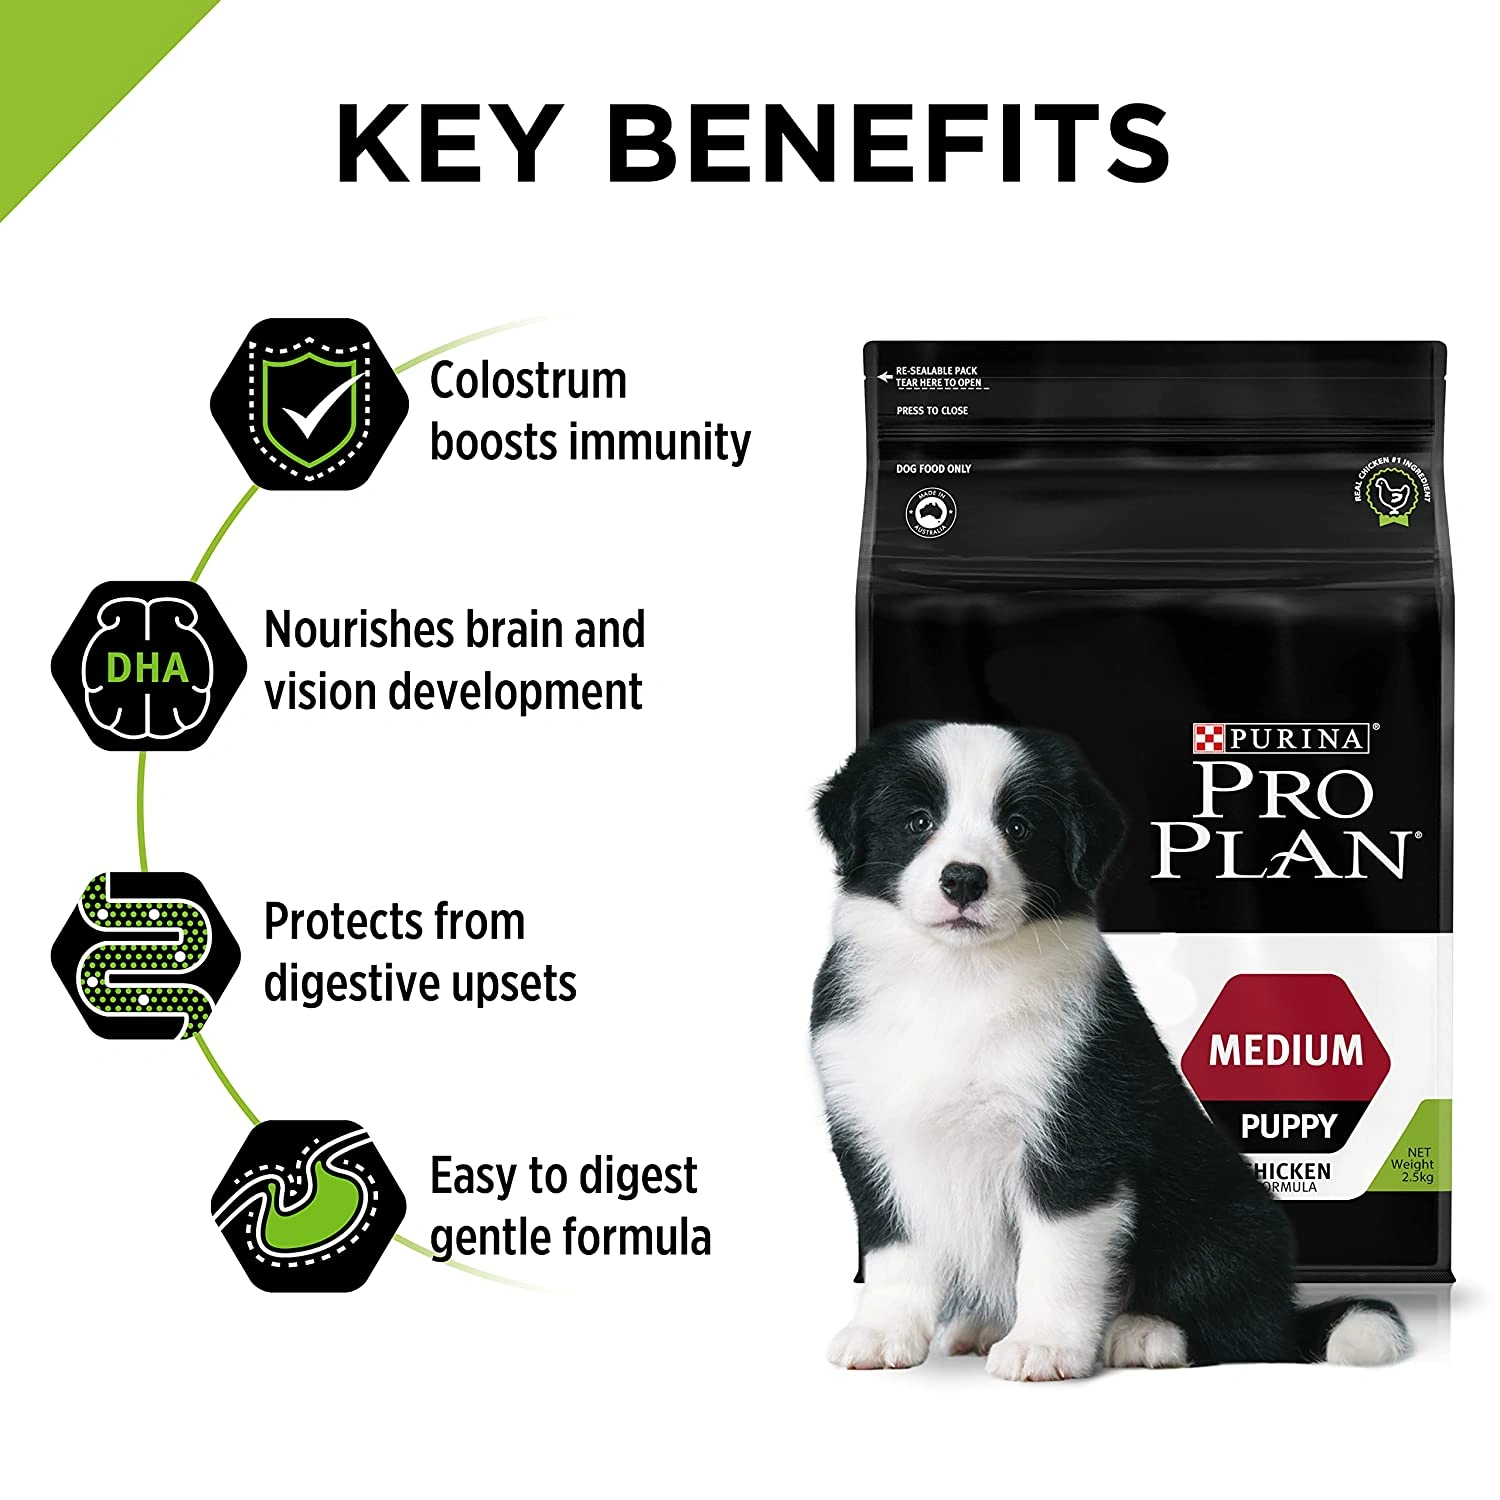 PURINA PRO PLAN Puppy Dry Dog Food for Medium Breed 2.5kg-2